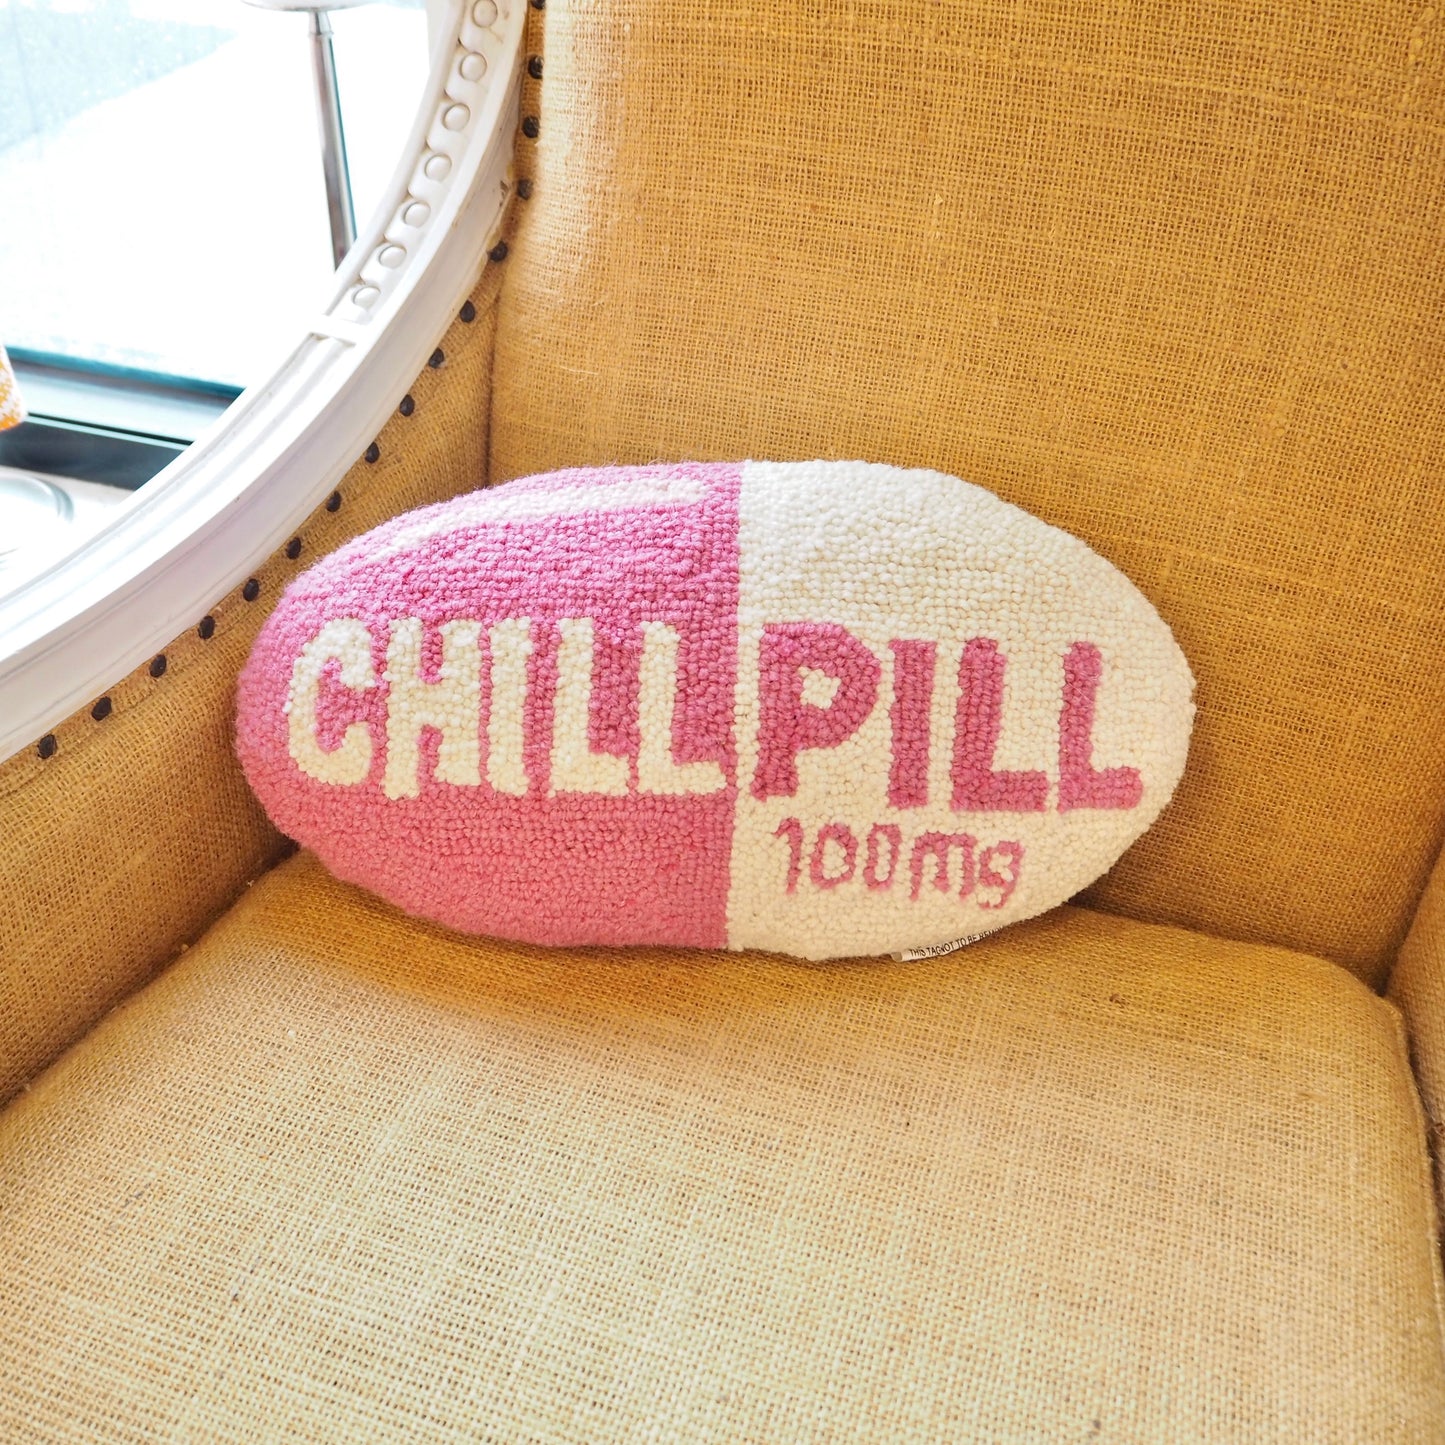 Chill Pill Hooked Pillow